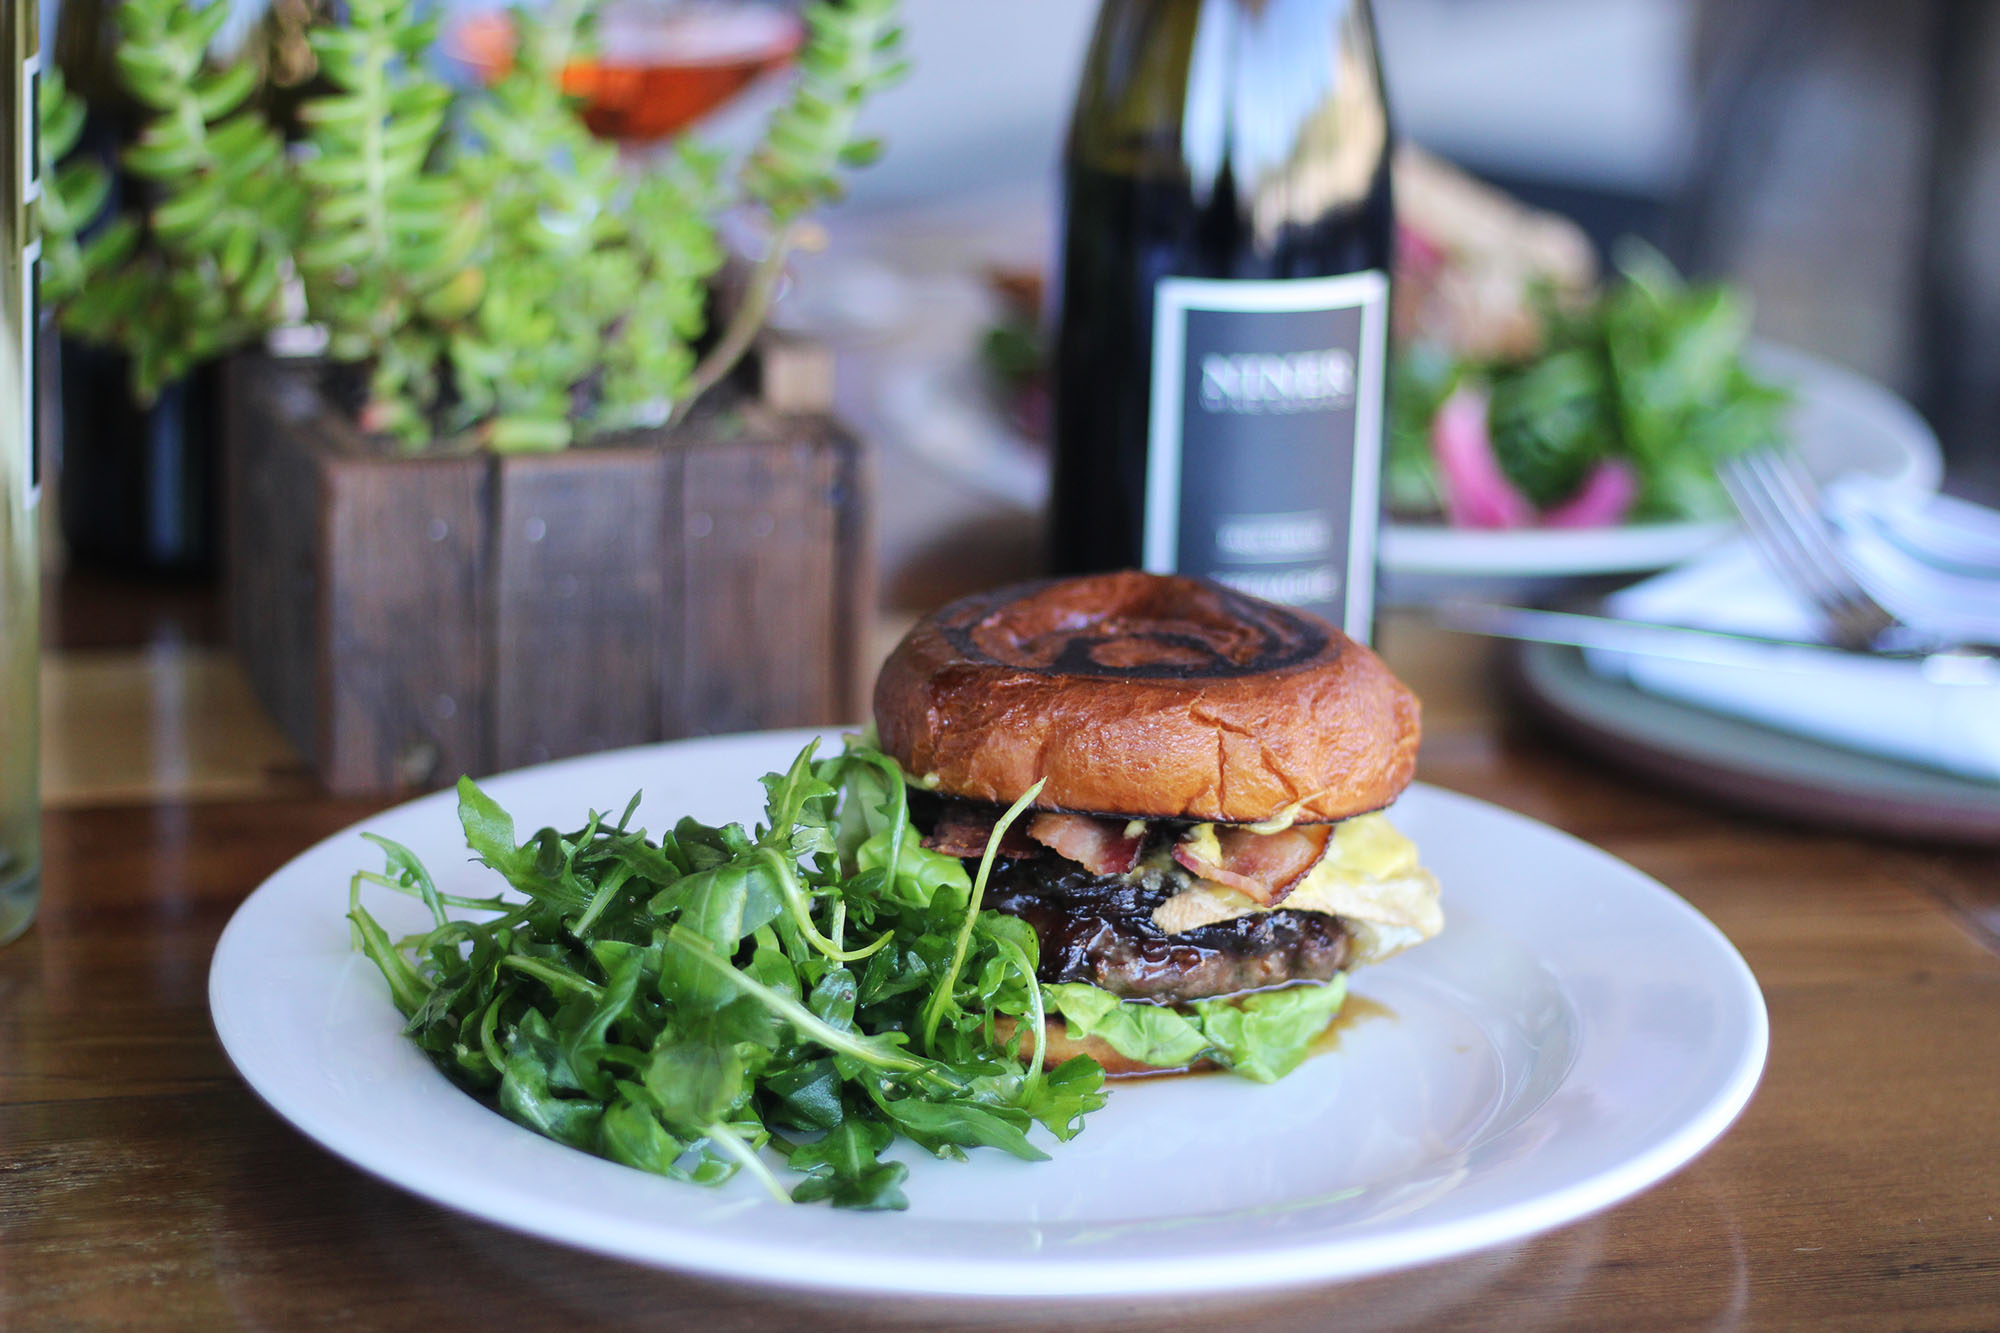 Our burger with a bed of garden greens